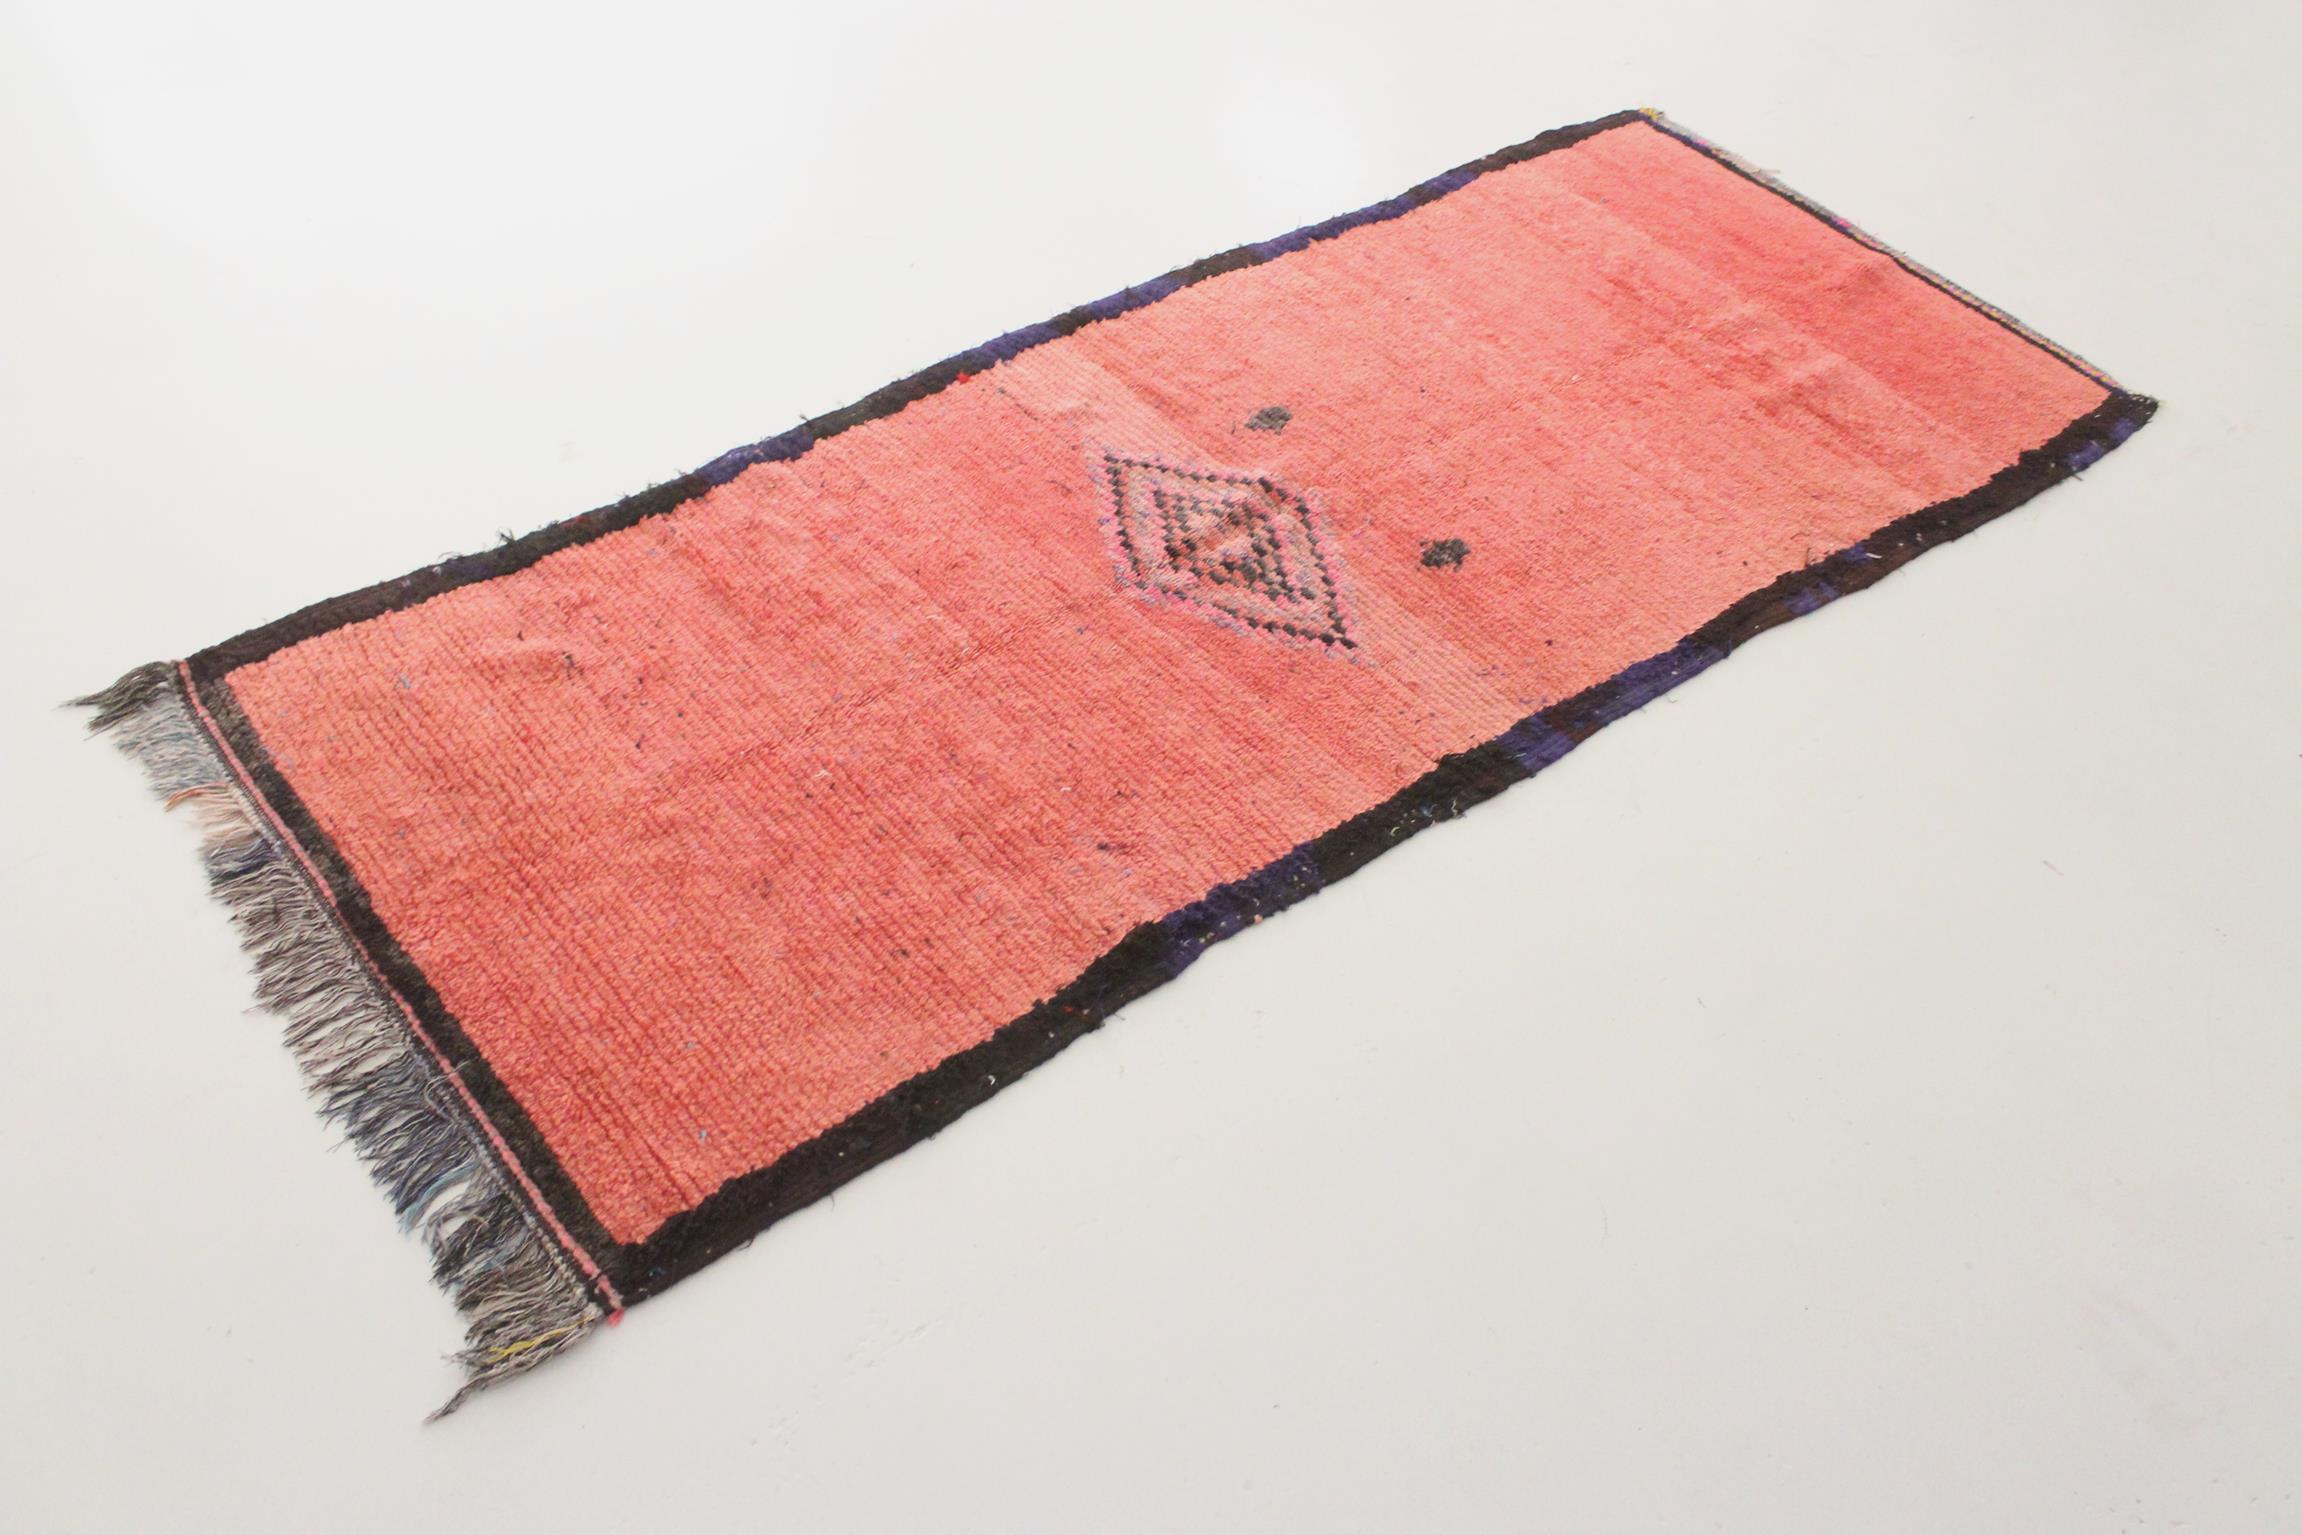 Hand-Knotted Vintage Moroccan Boujad runner rug - Rich pink - 3.4x8.4feet / 105x257cm For Sale